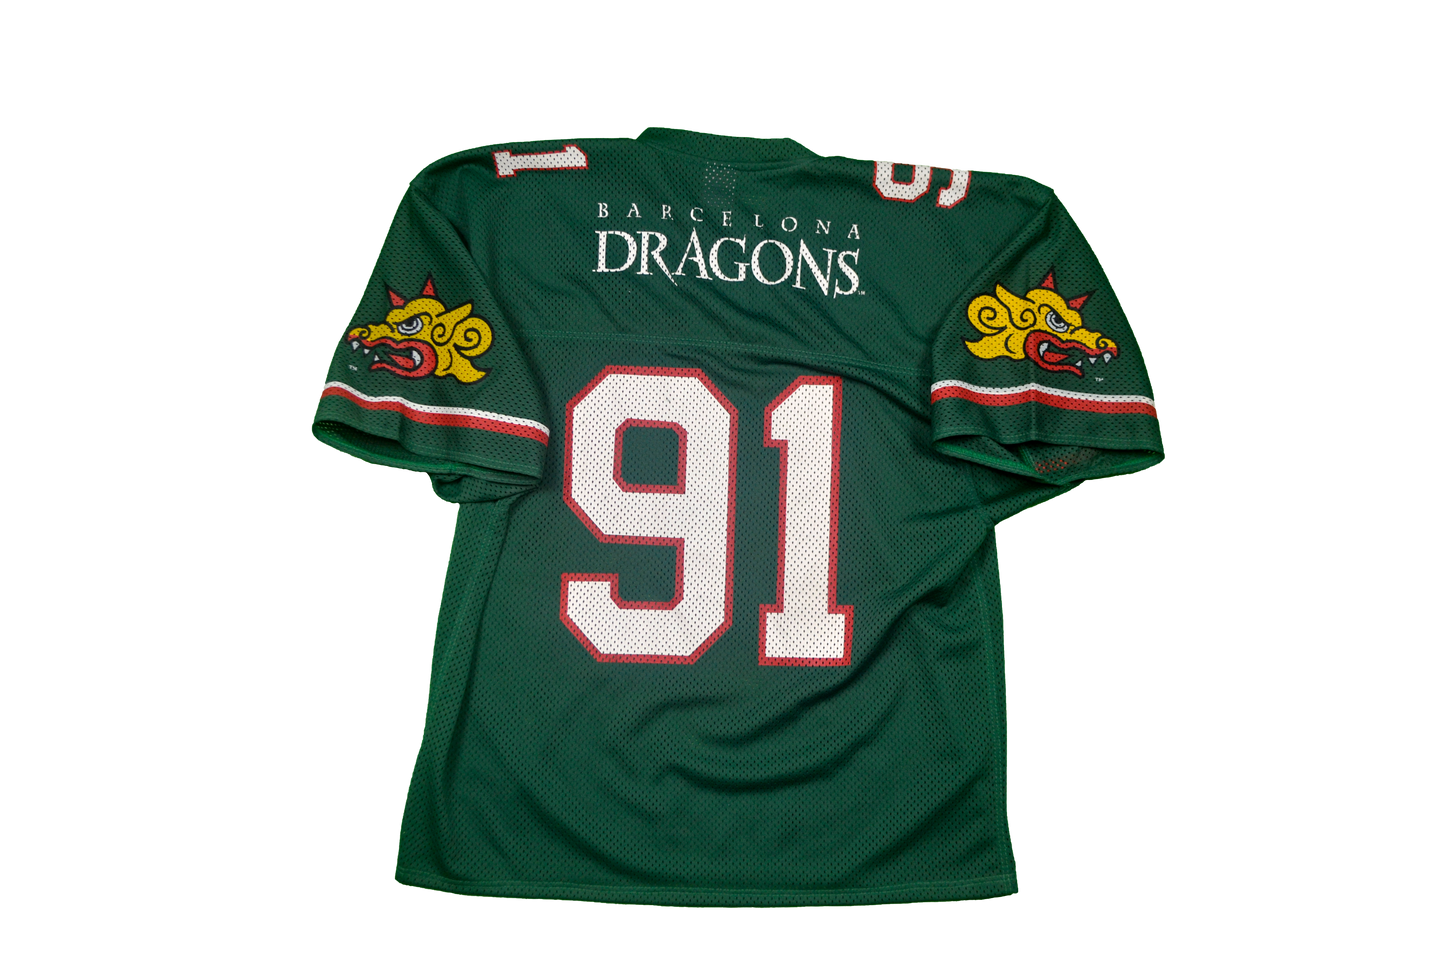 1991 Barcelona Dragons Oficial Jersey